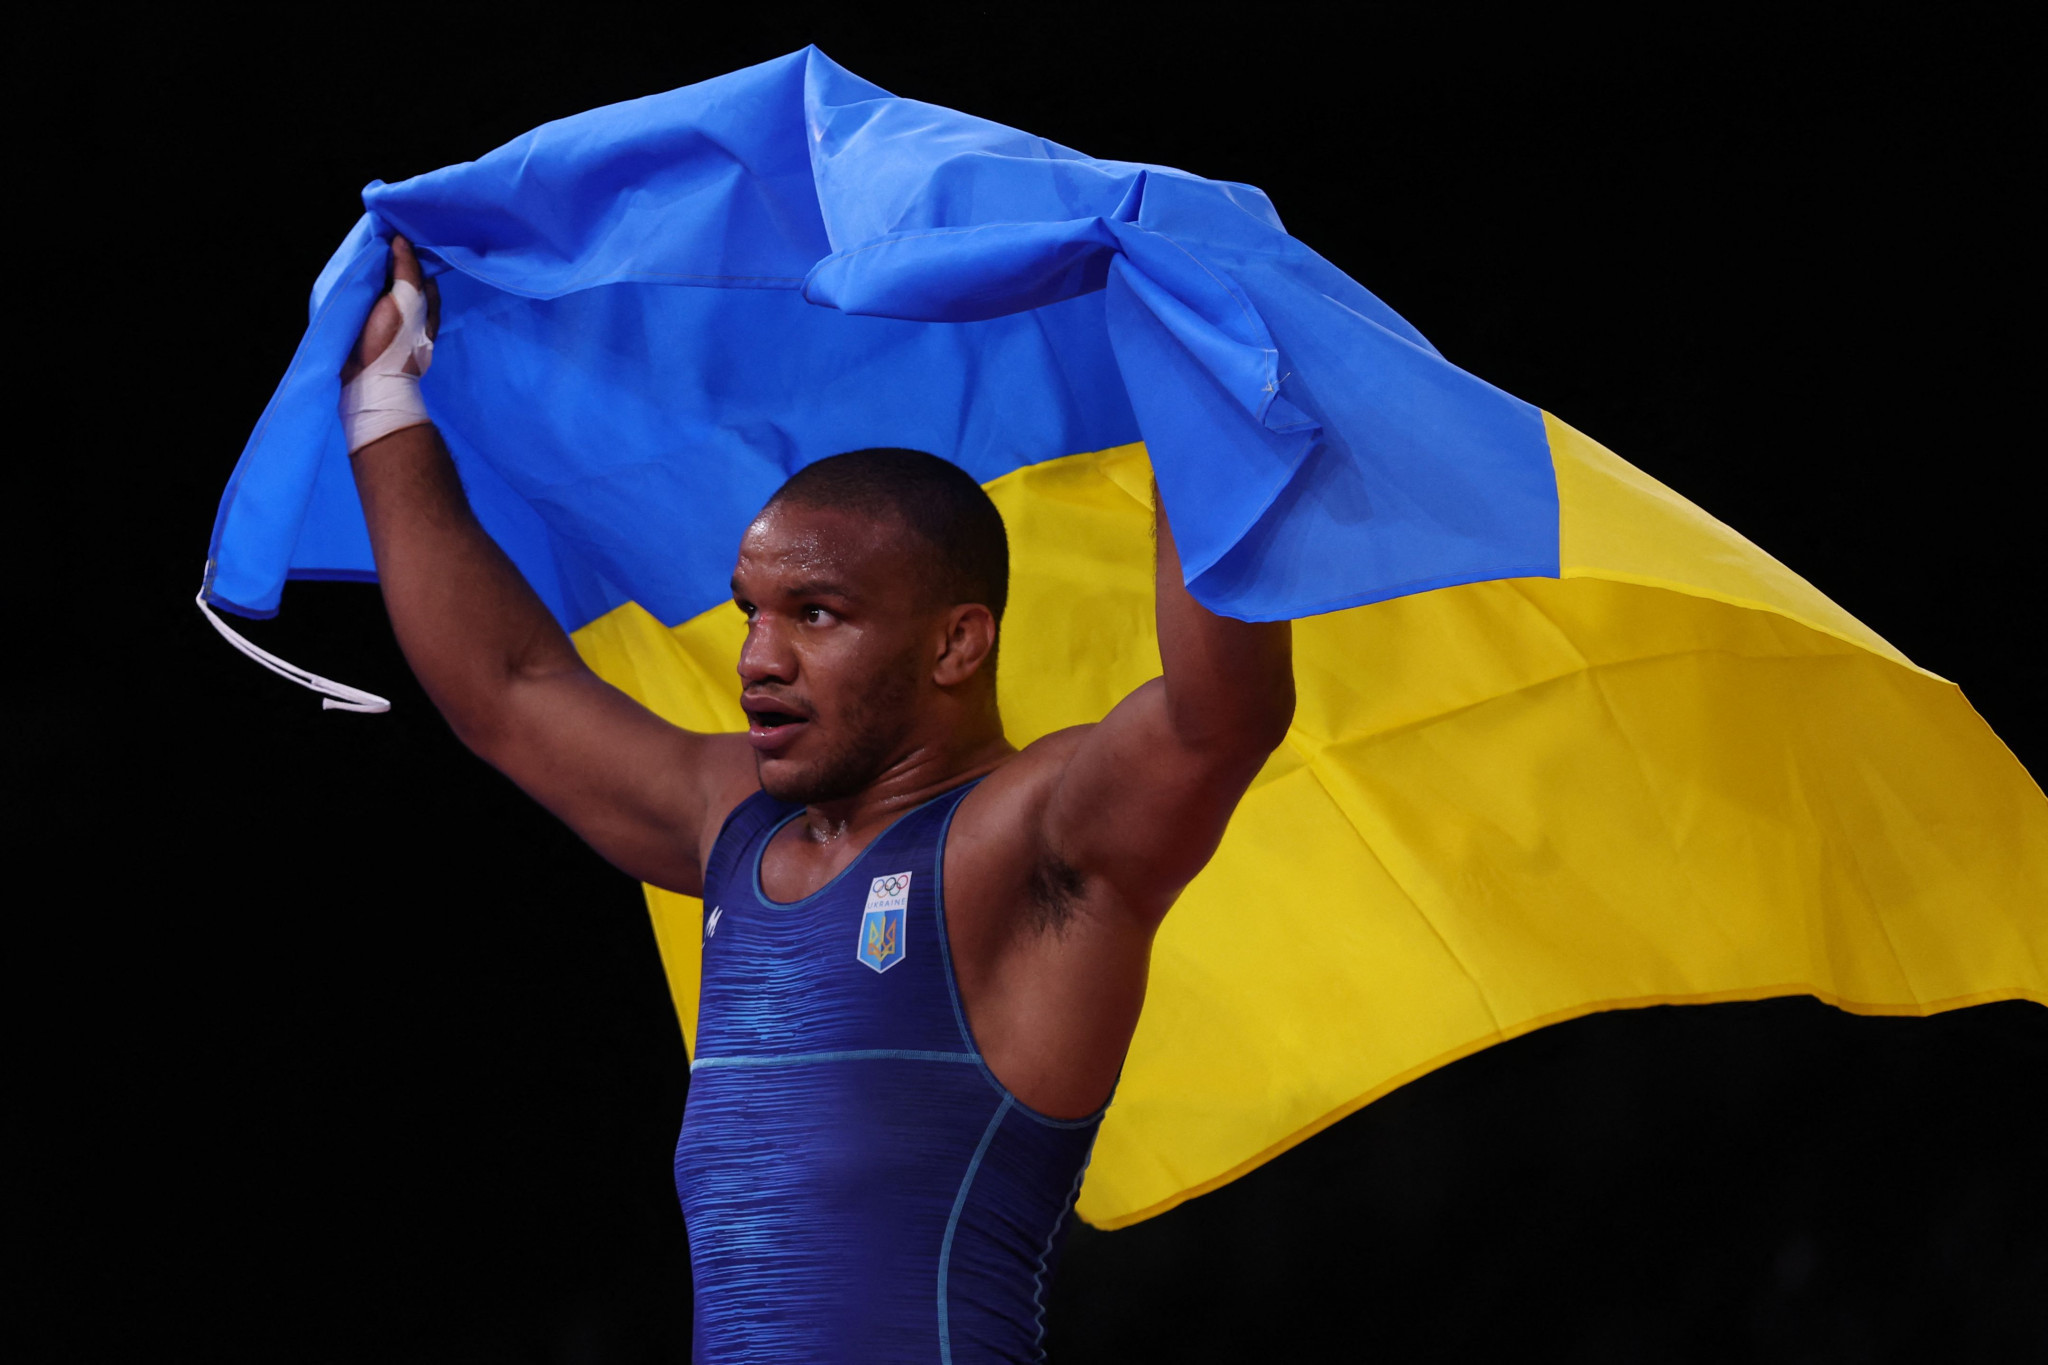 Zhan Beleniuk is a two-time Olympic wrestling medallist ©Getty Images